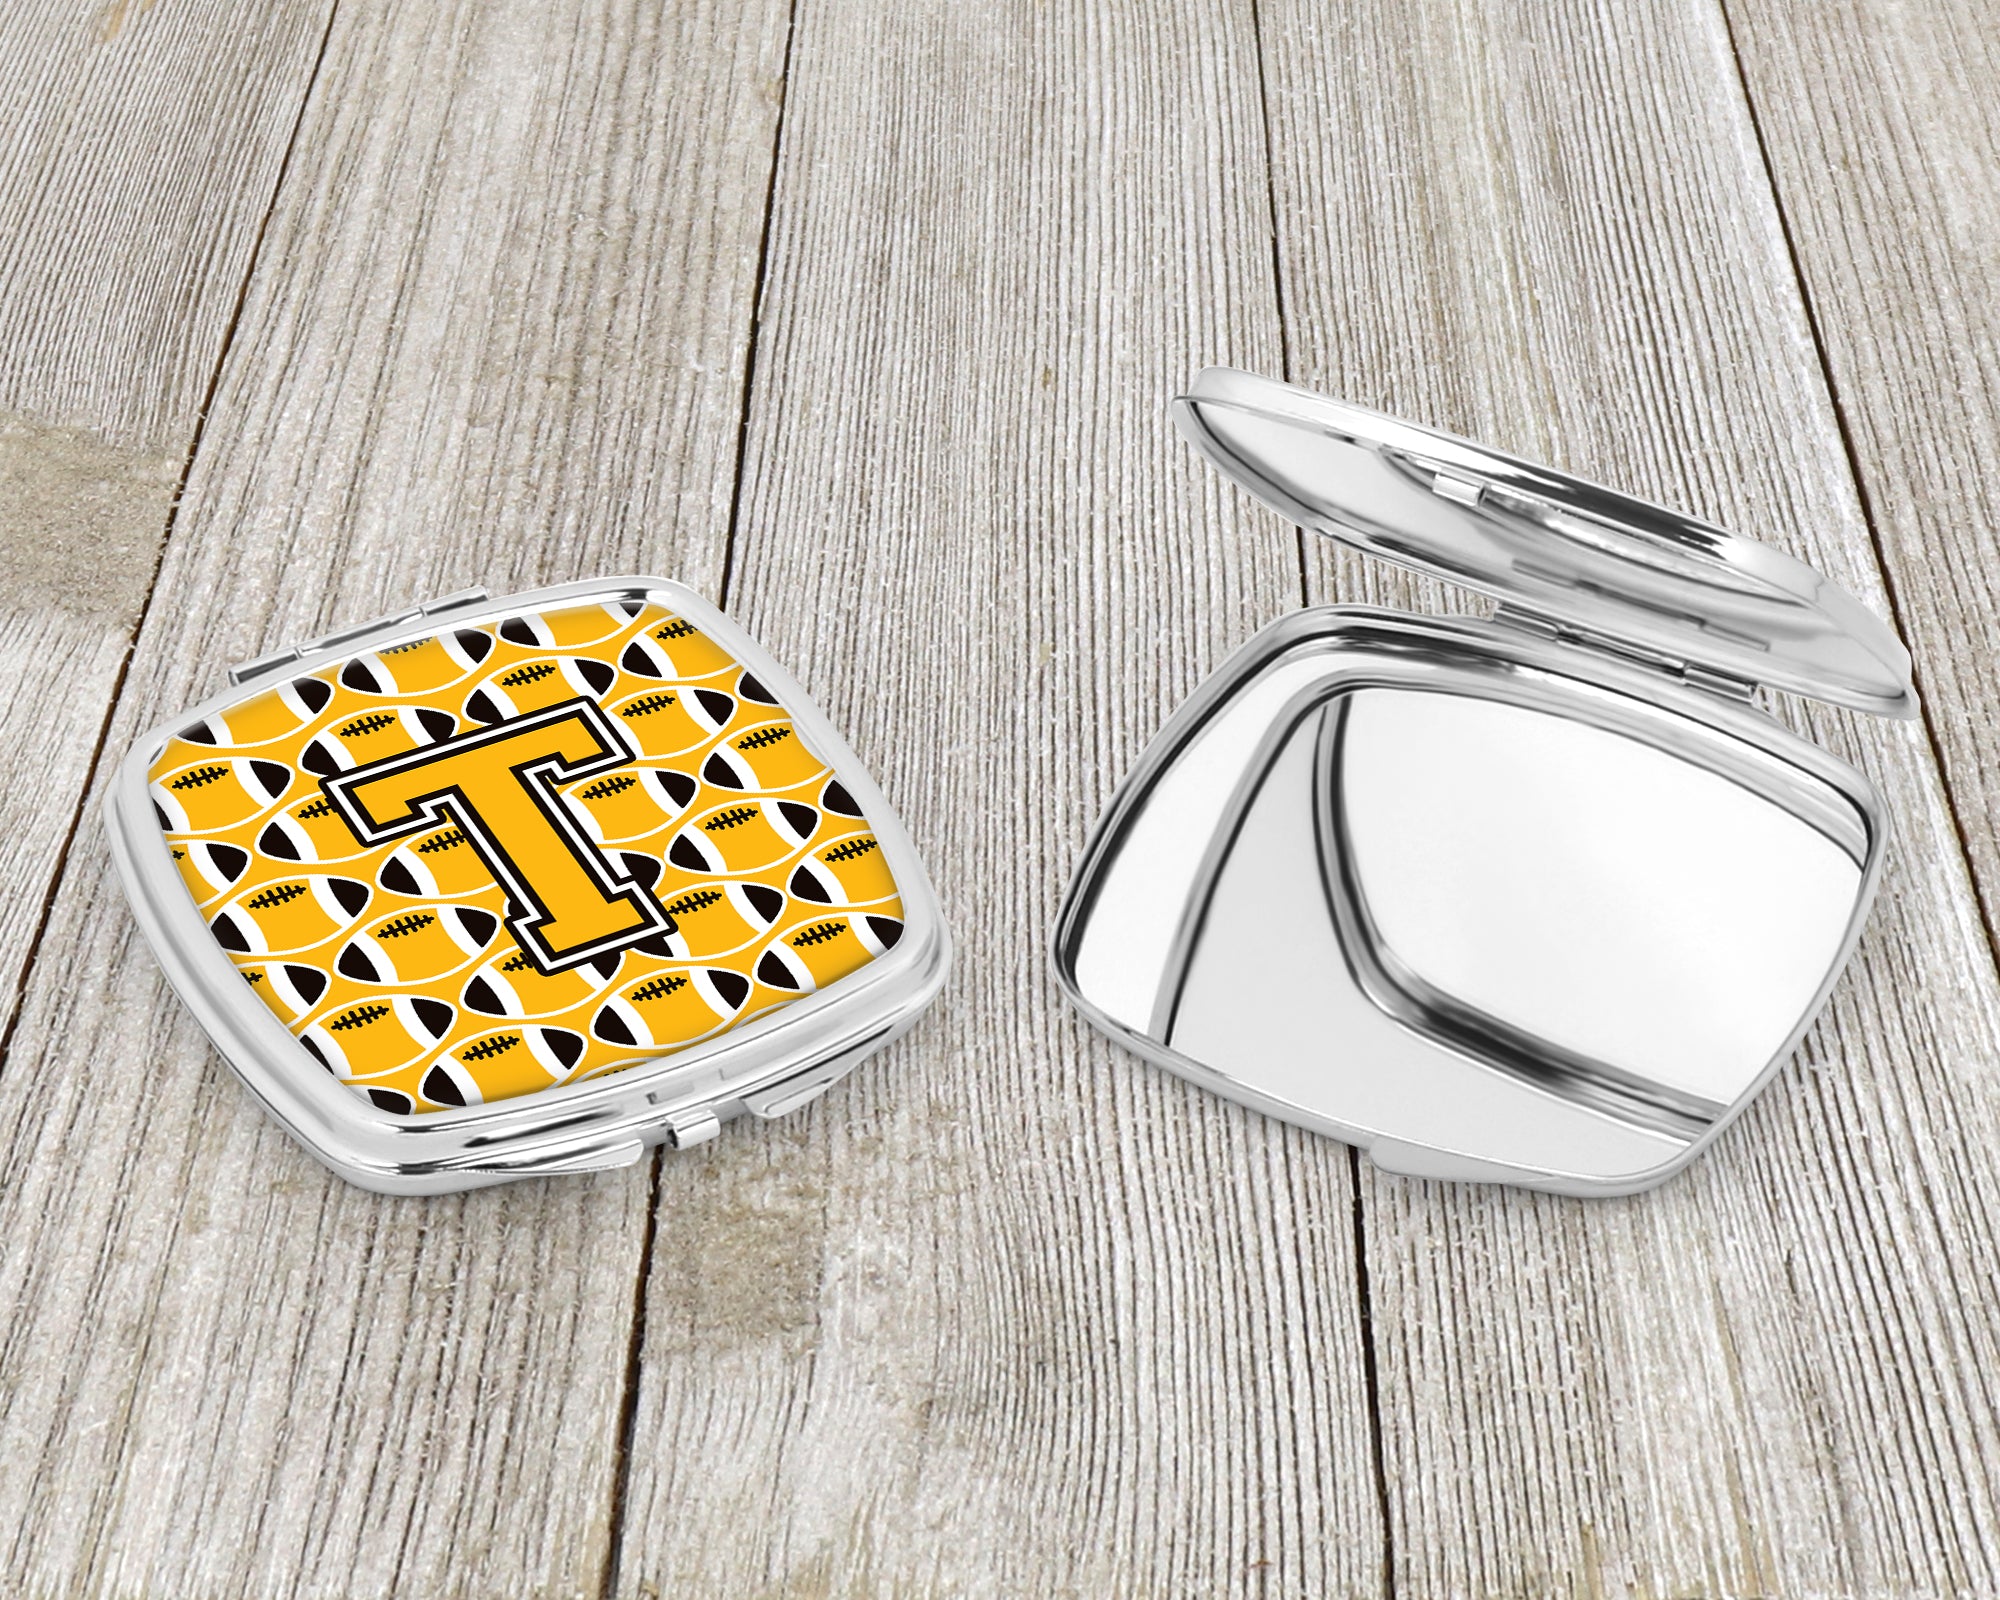 Letter T Football Black, Old Gold and White Compact Mirror CJ1080-TSCM  the-store.com.